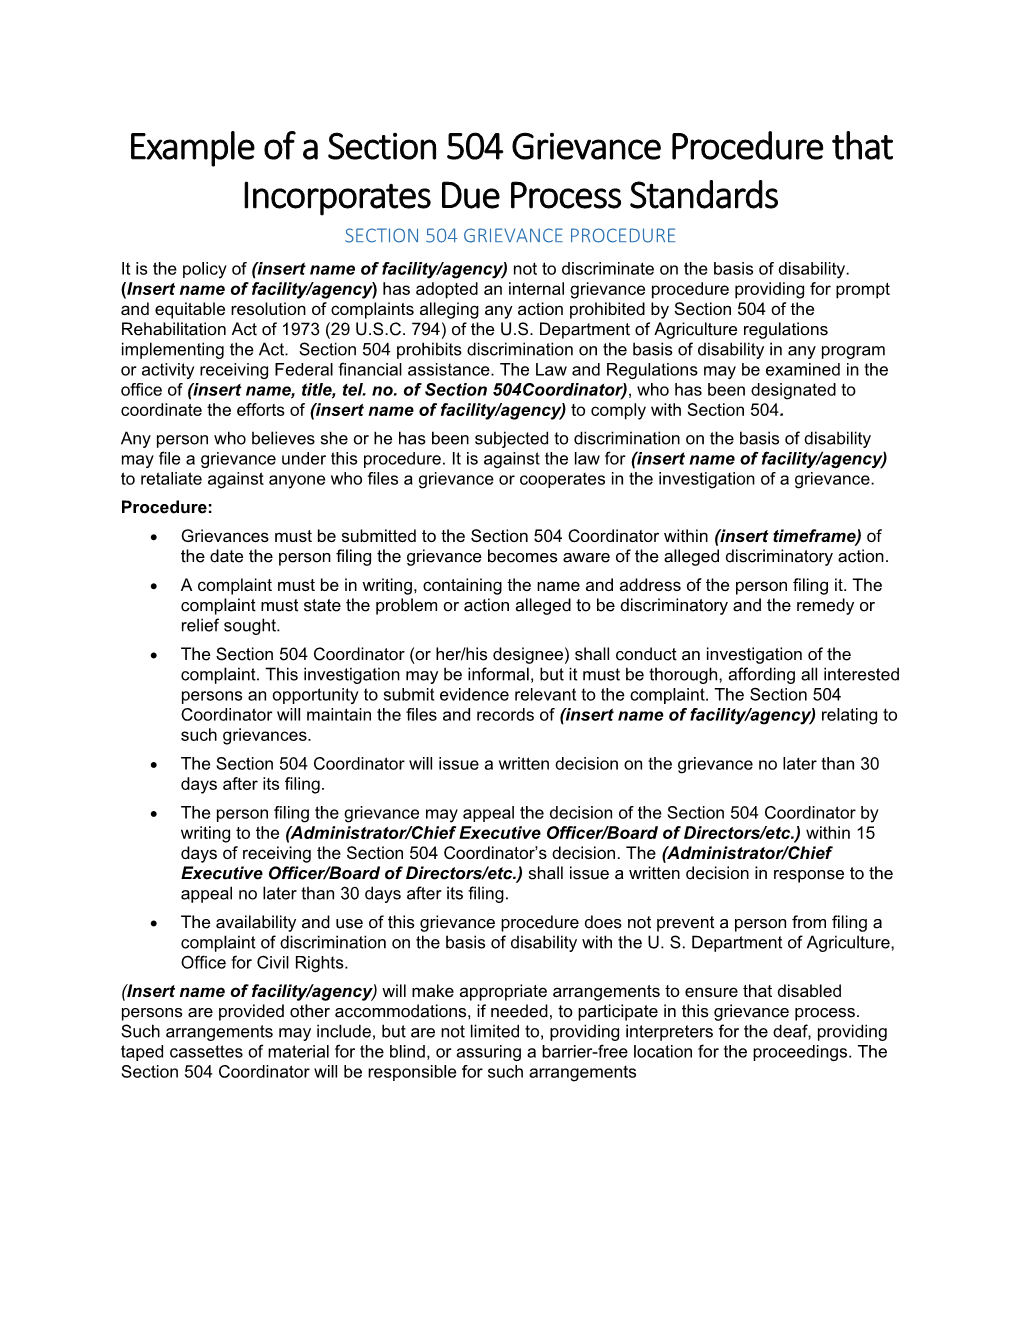 Example of a Section 504 Grievance Procedure That Incorporates Due Process Standards